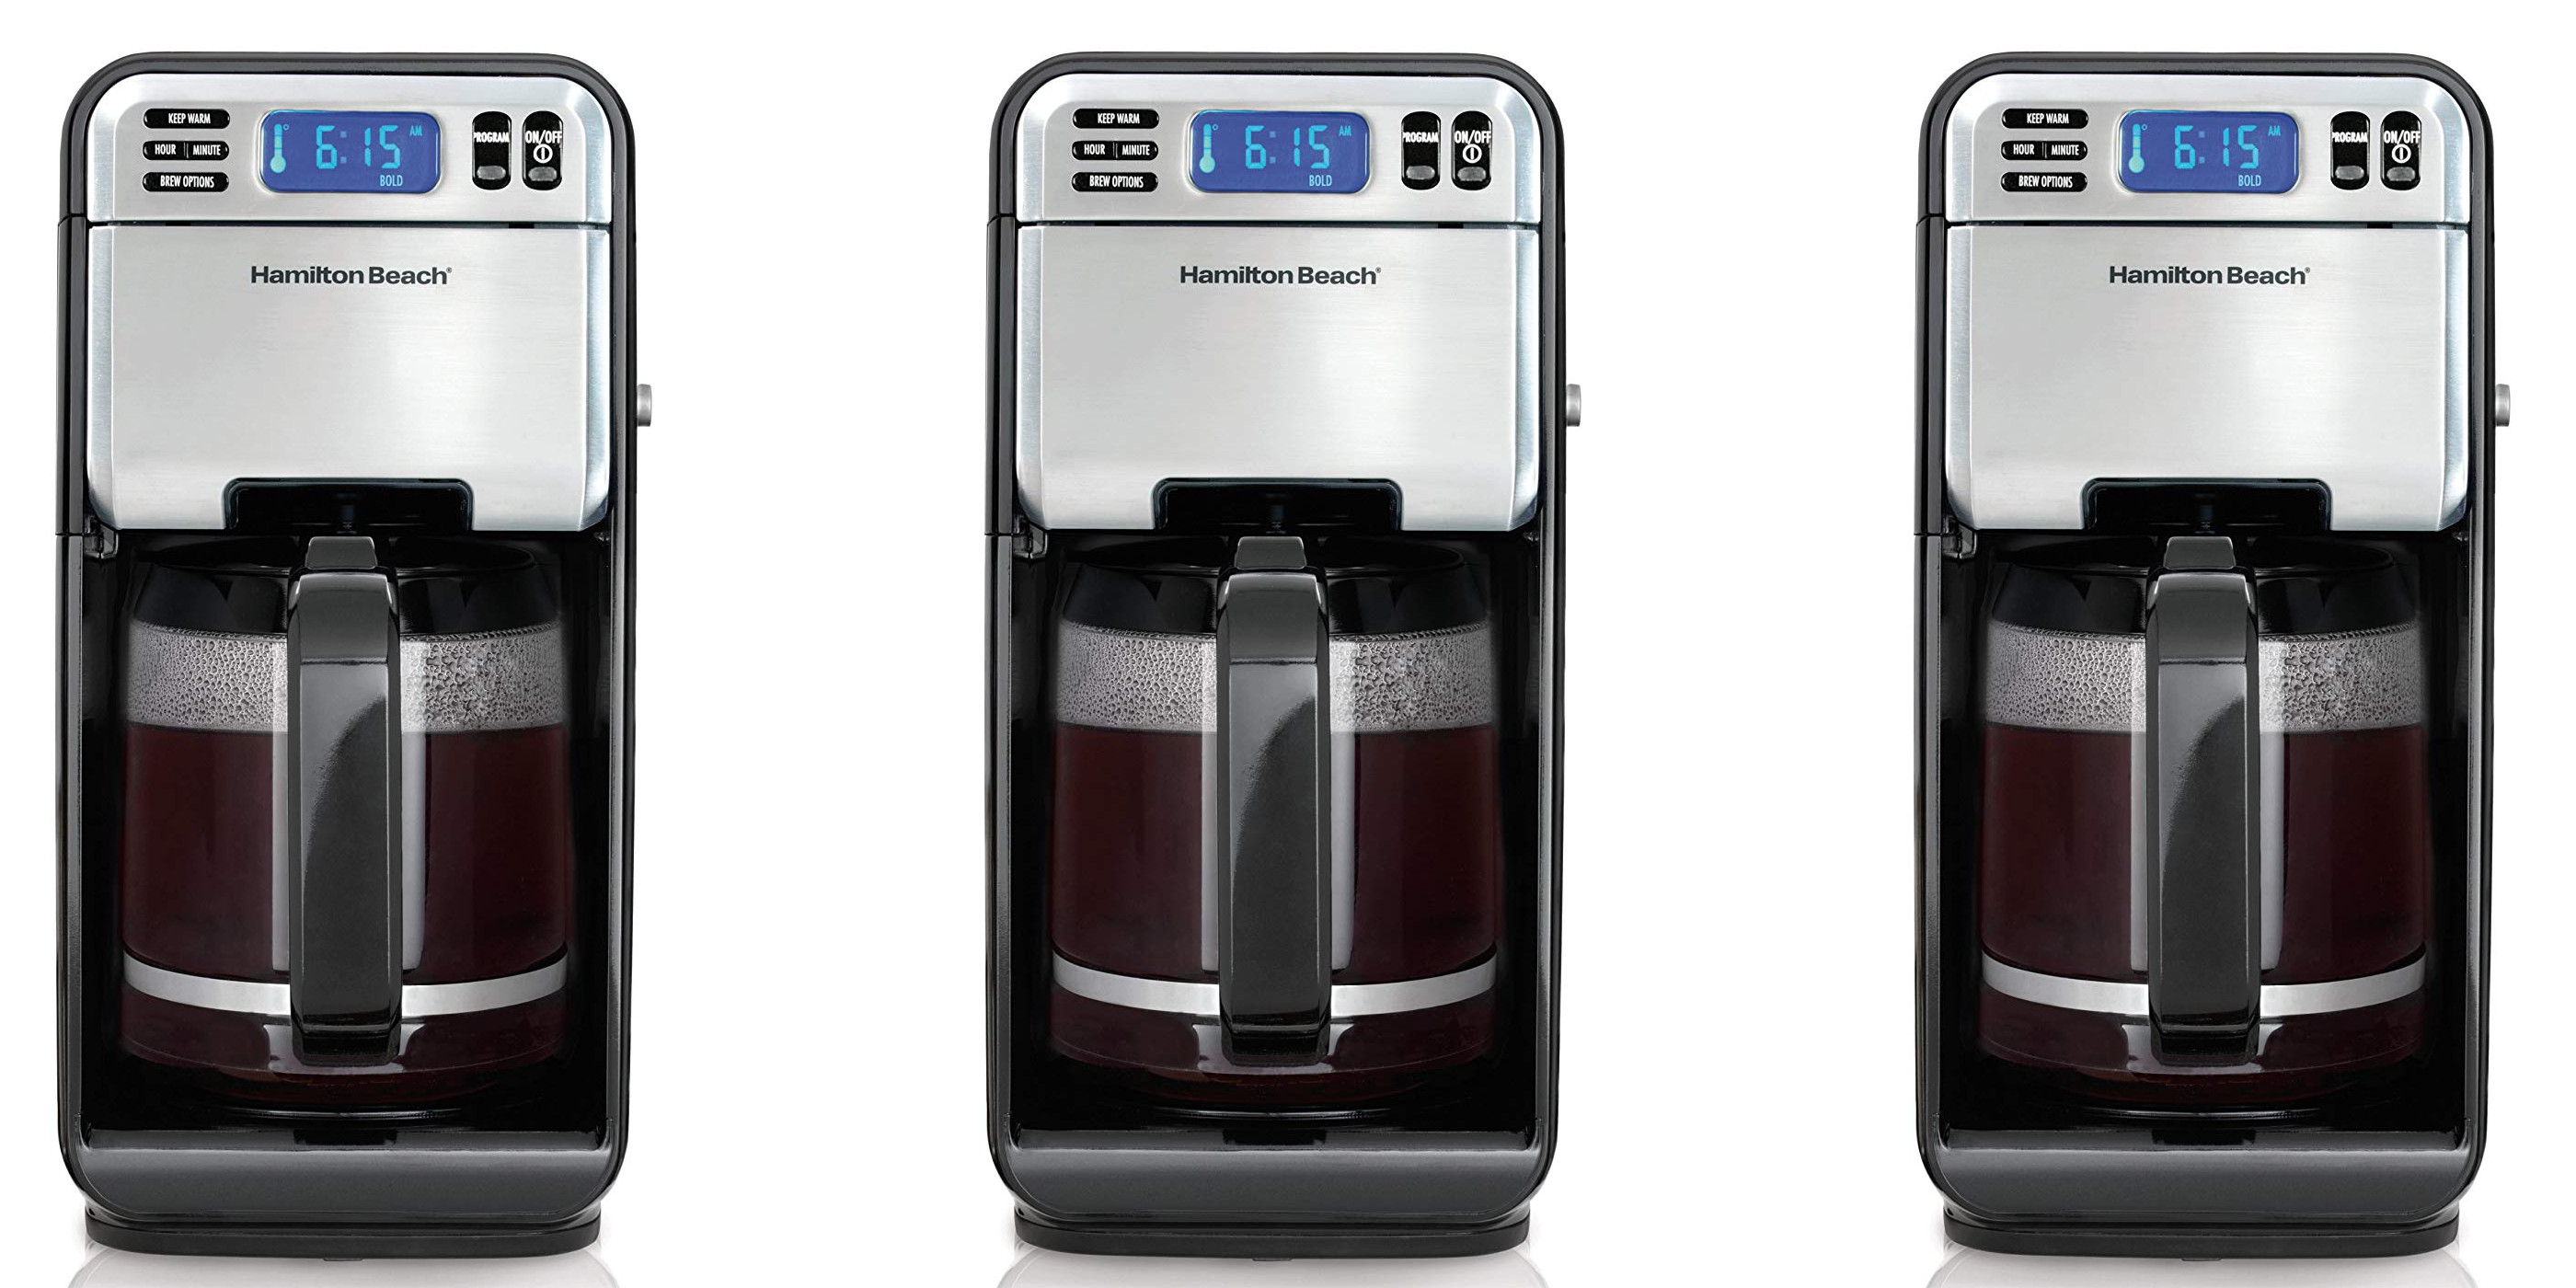 https://9to5toys.com/wp-content/uploads/sites/5/2019/02/Hamilton-Beach-12-Cup-Digital-Automatic-LCD-Programmable-Coffeemaker-Brewer-46205.jpg